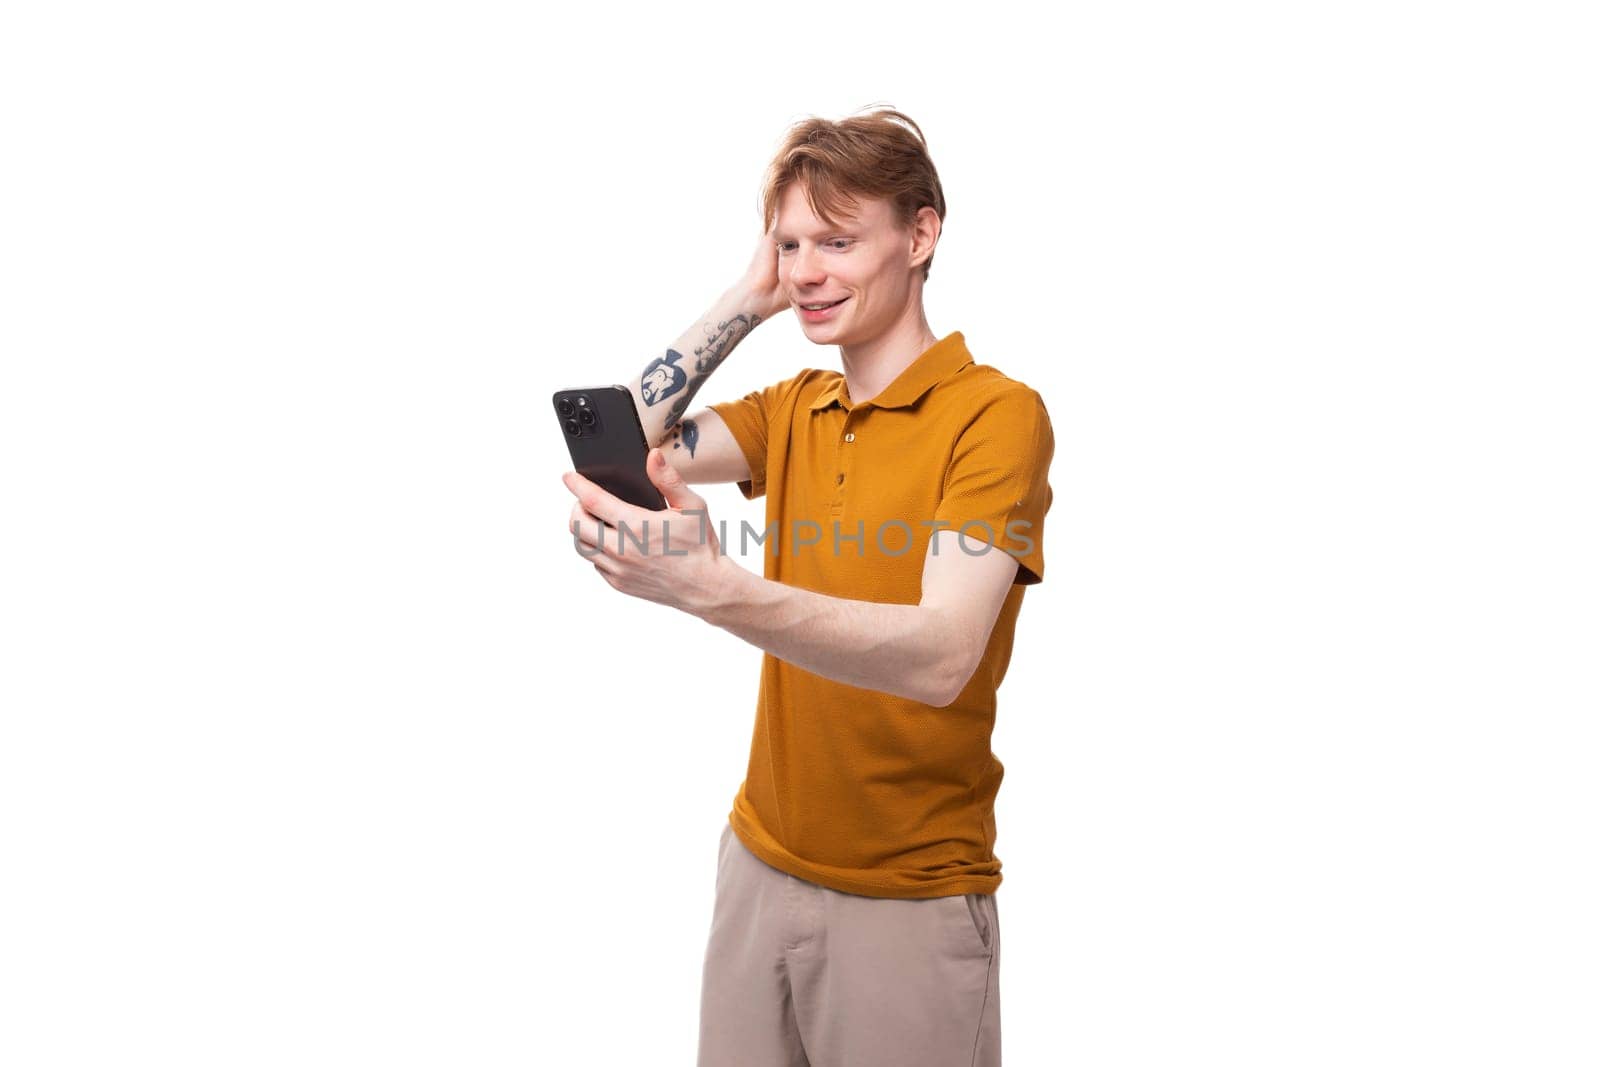 a young guy with short red hair dressed in a summer T-shirt uses social networks in a smartphone.